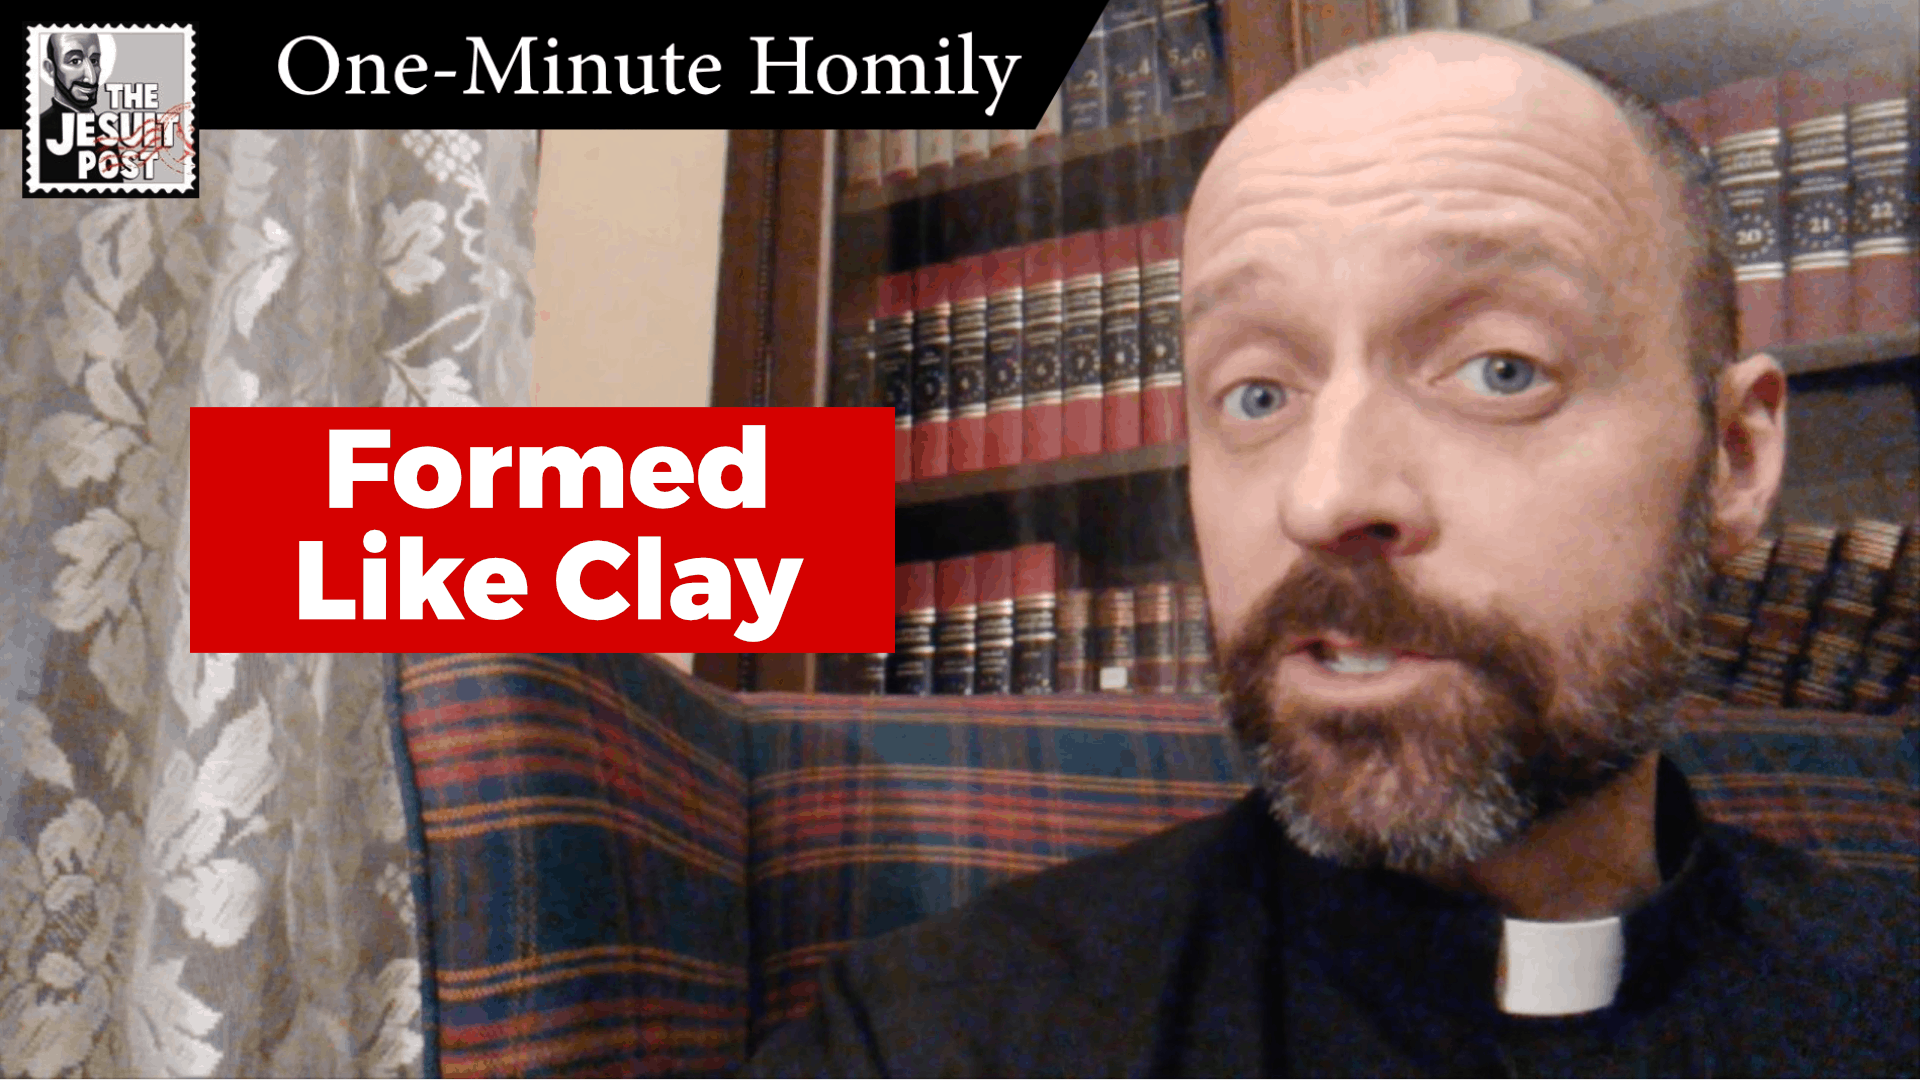 One-Minute Homily: “Formed Like Clay”